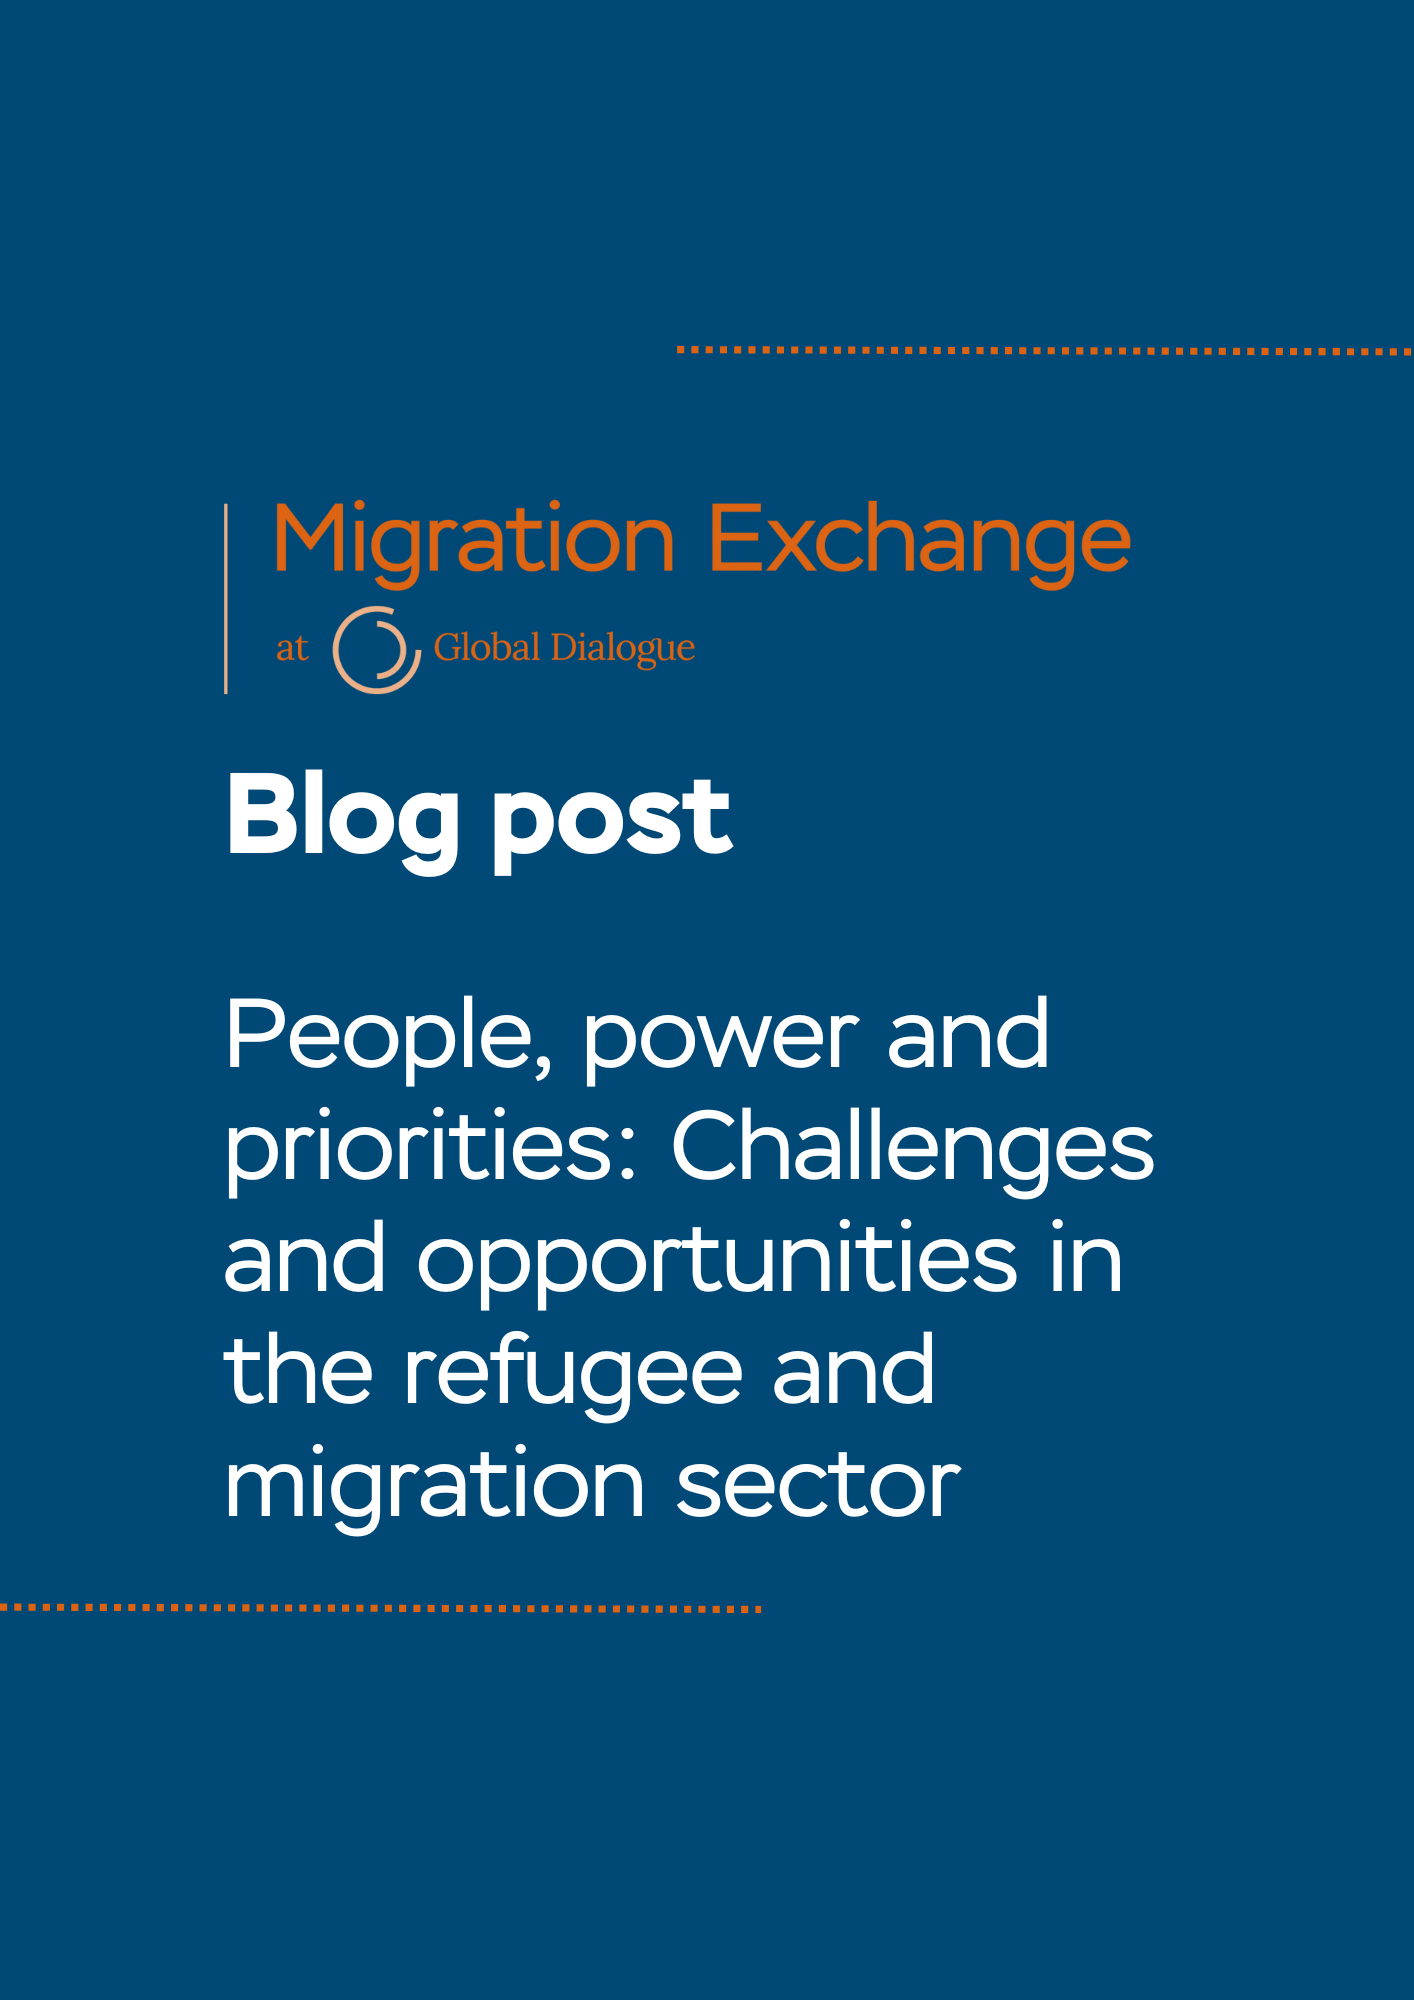 BLOG: People, power and priorities: Challenges and opportunities in the refugee and migration sector